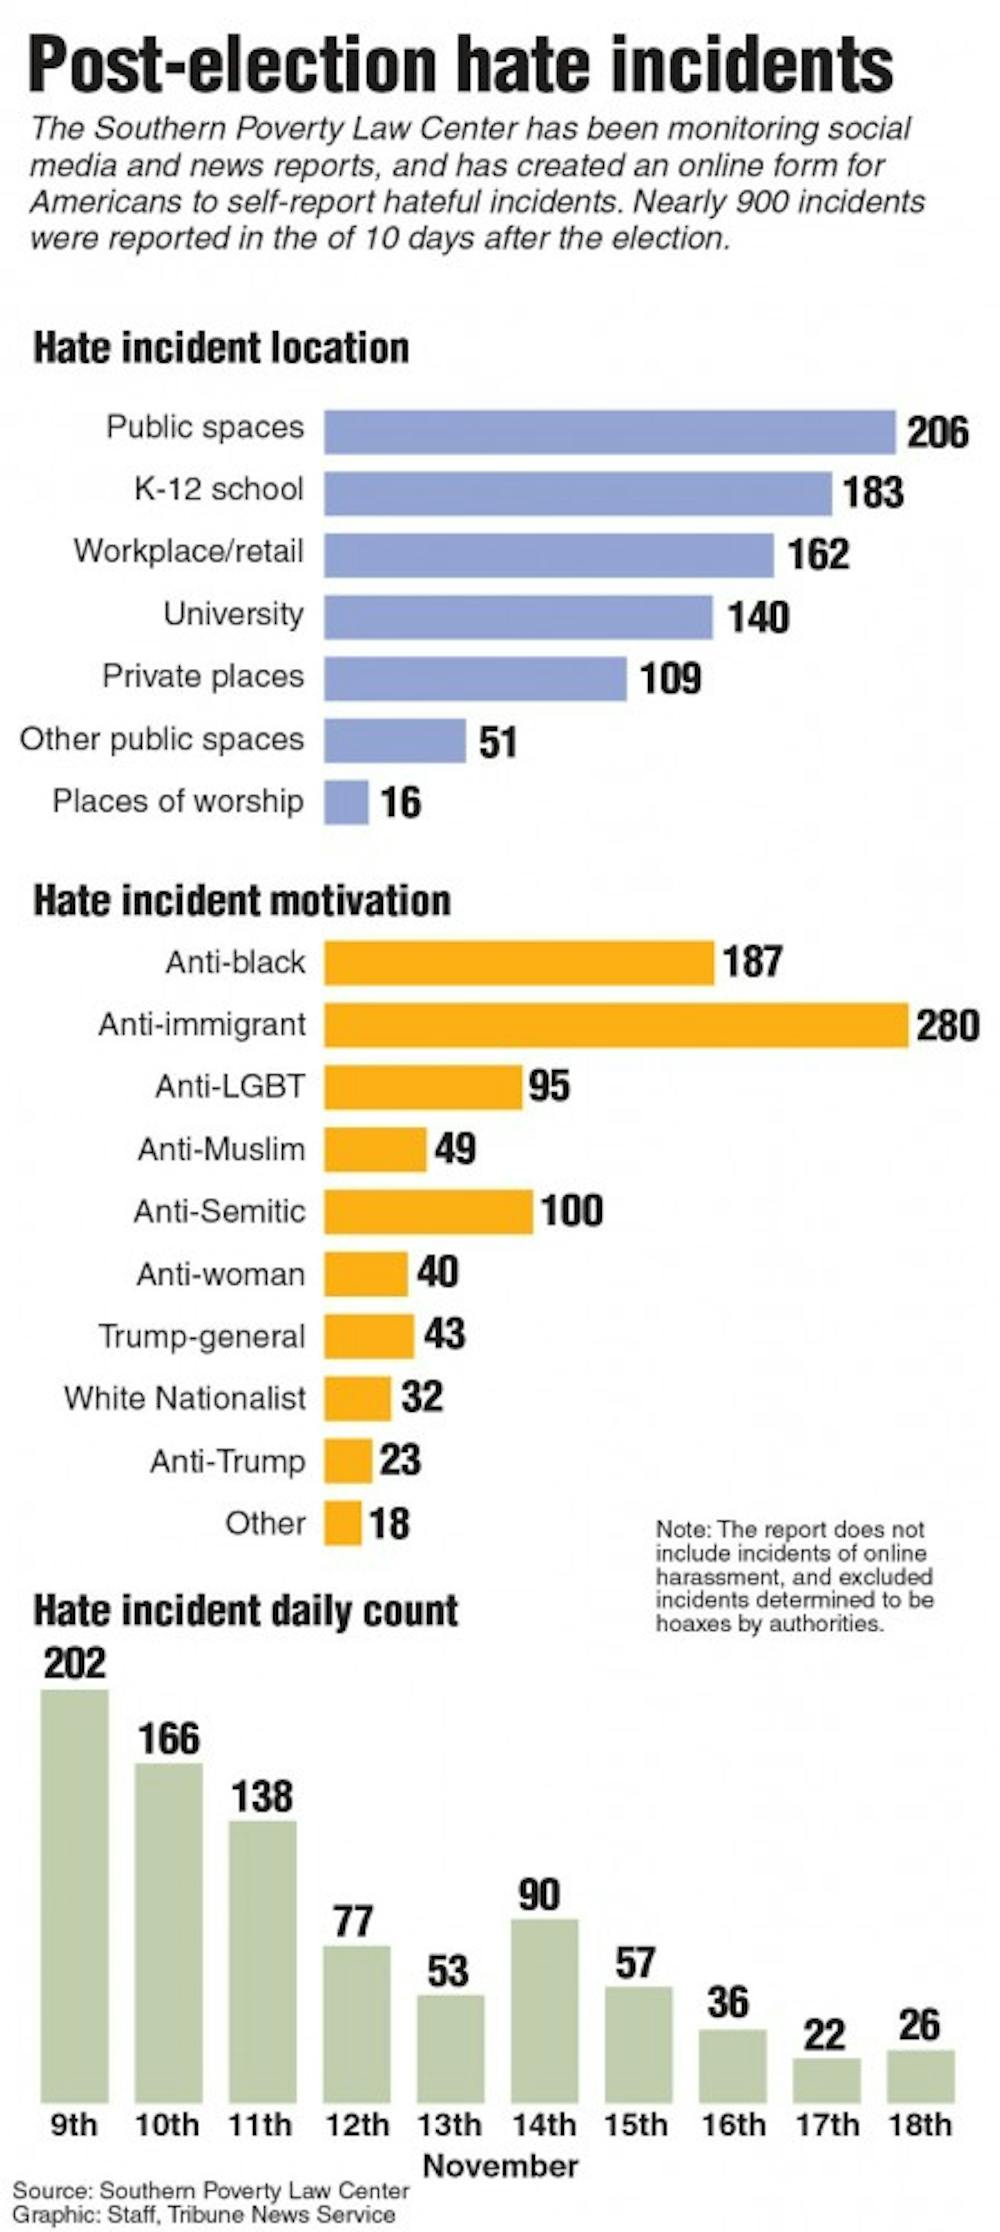 Chart showing the number of hate incidents following the election.